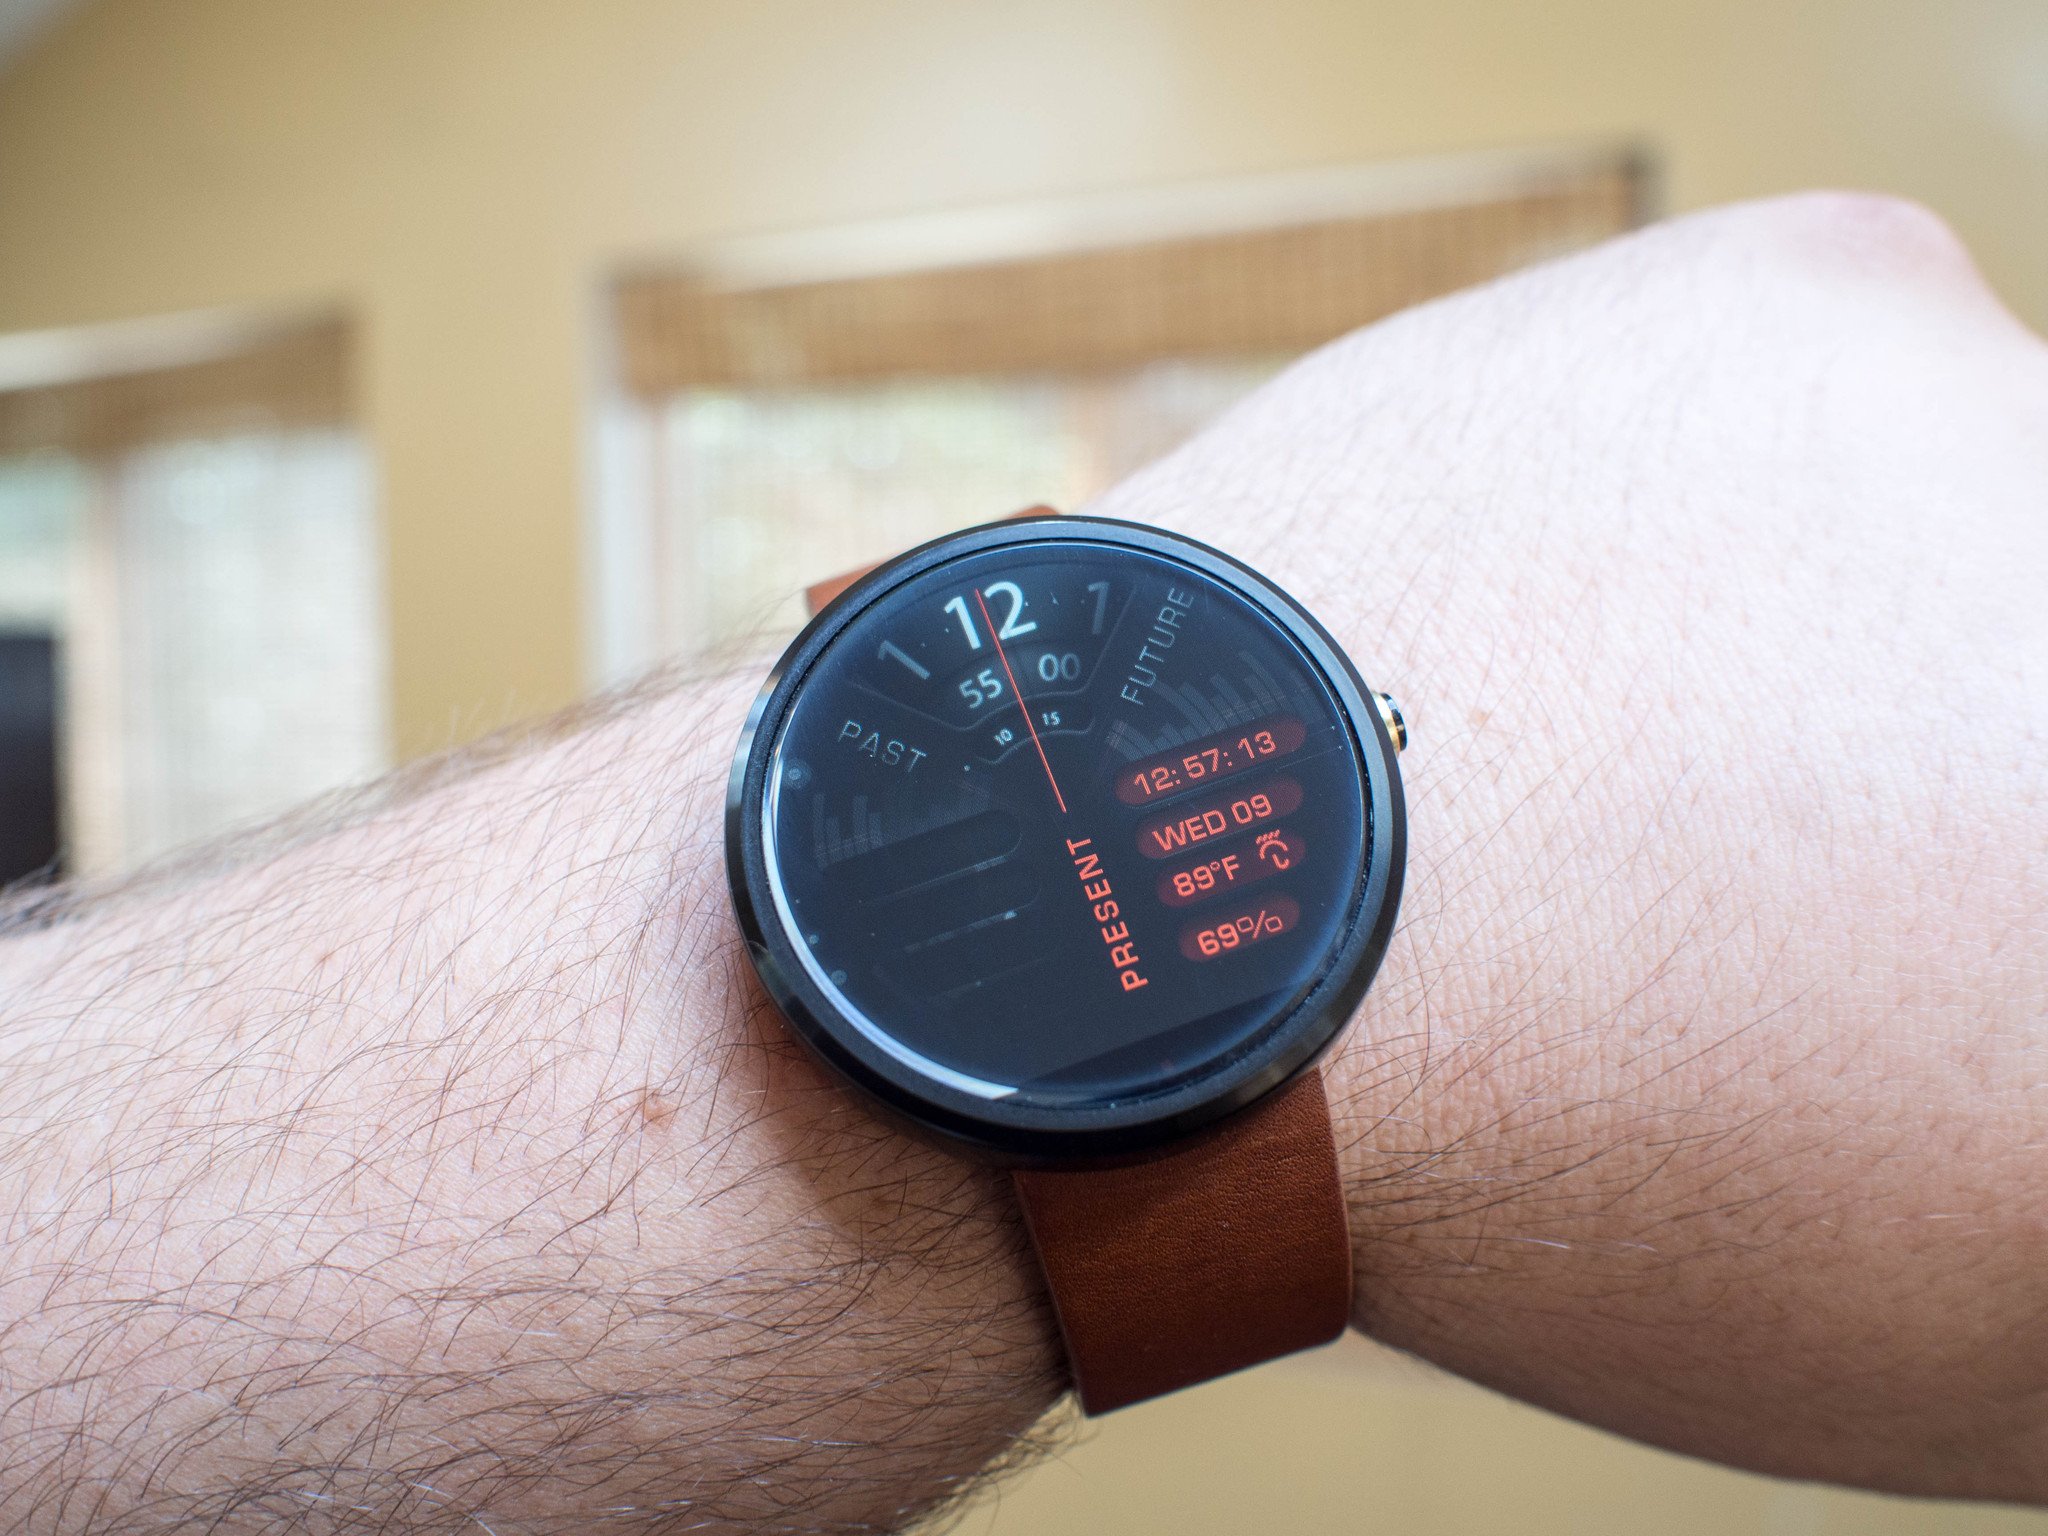 Moto 360 Android Wear 1.3